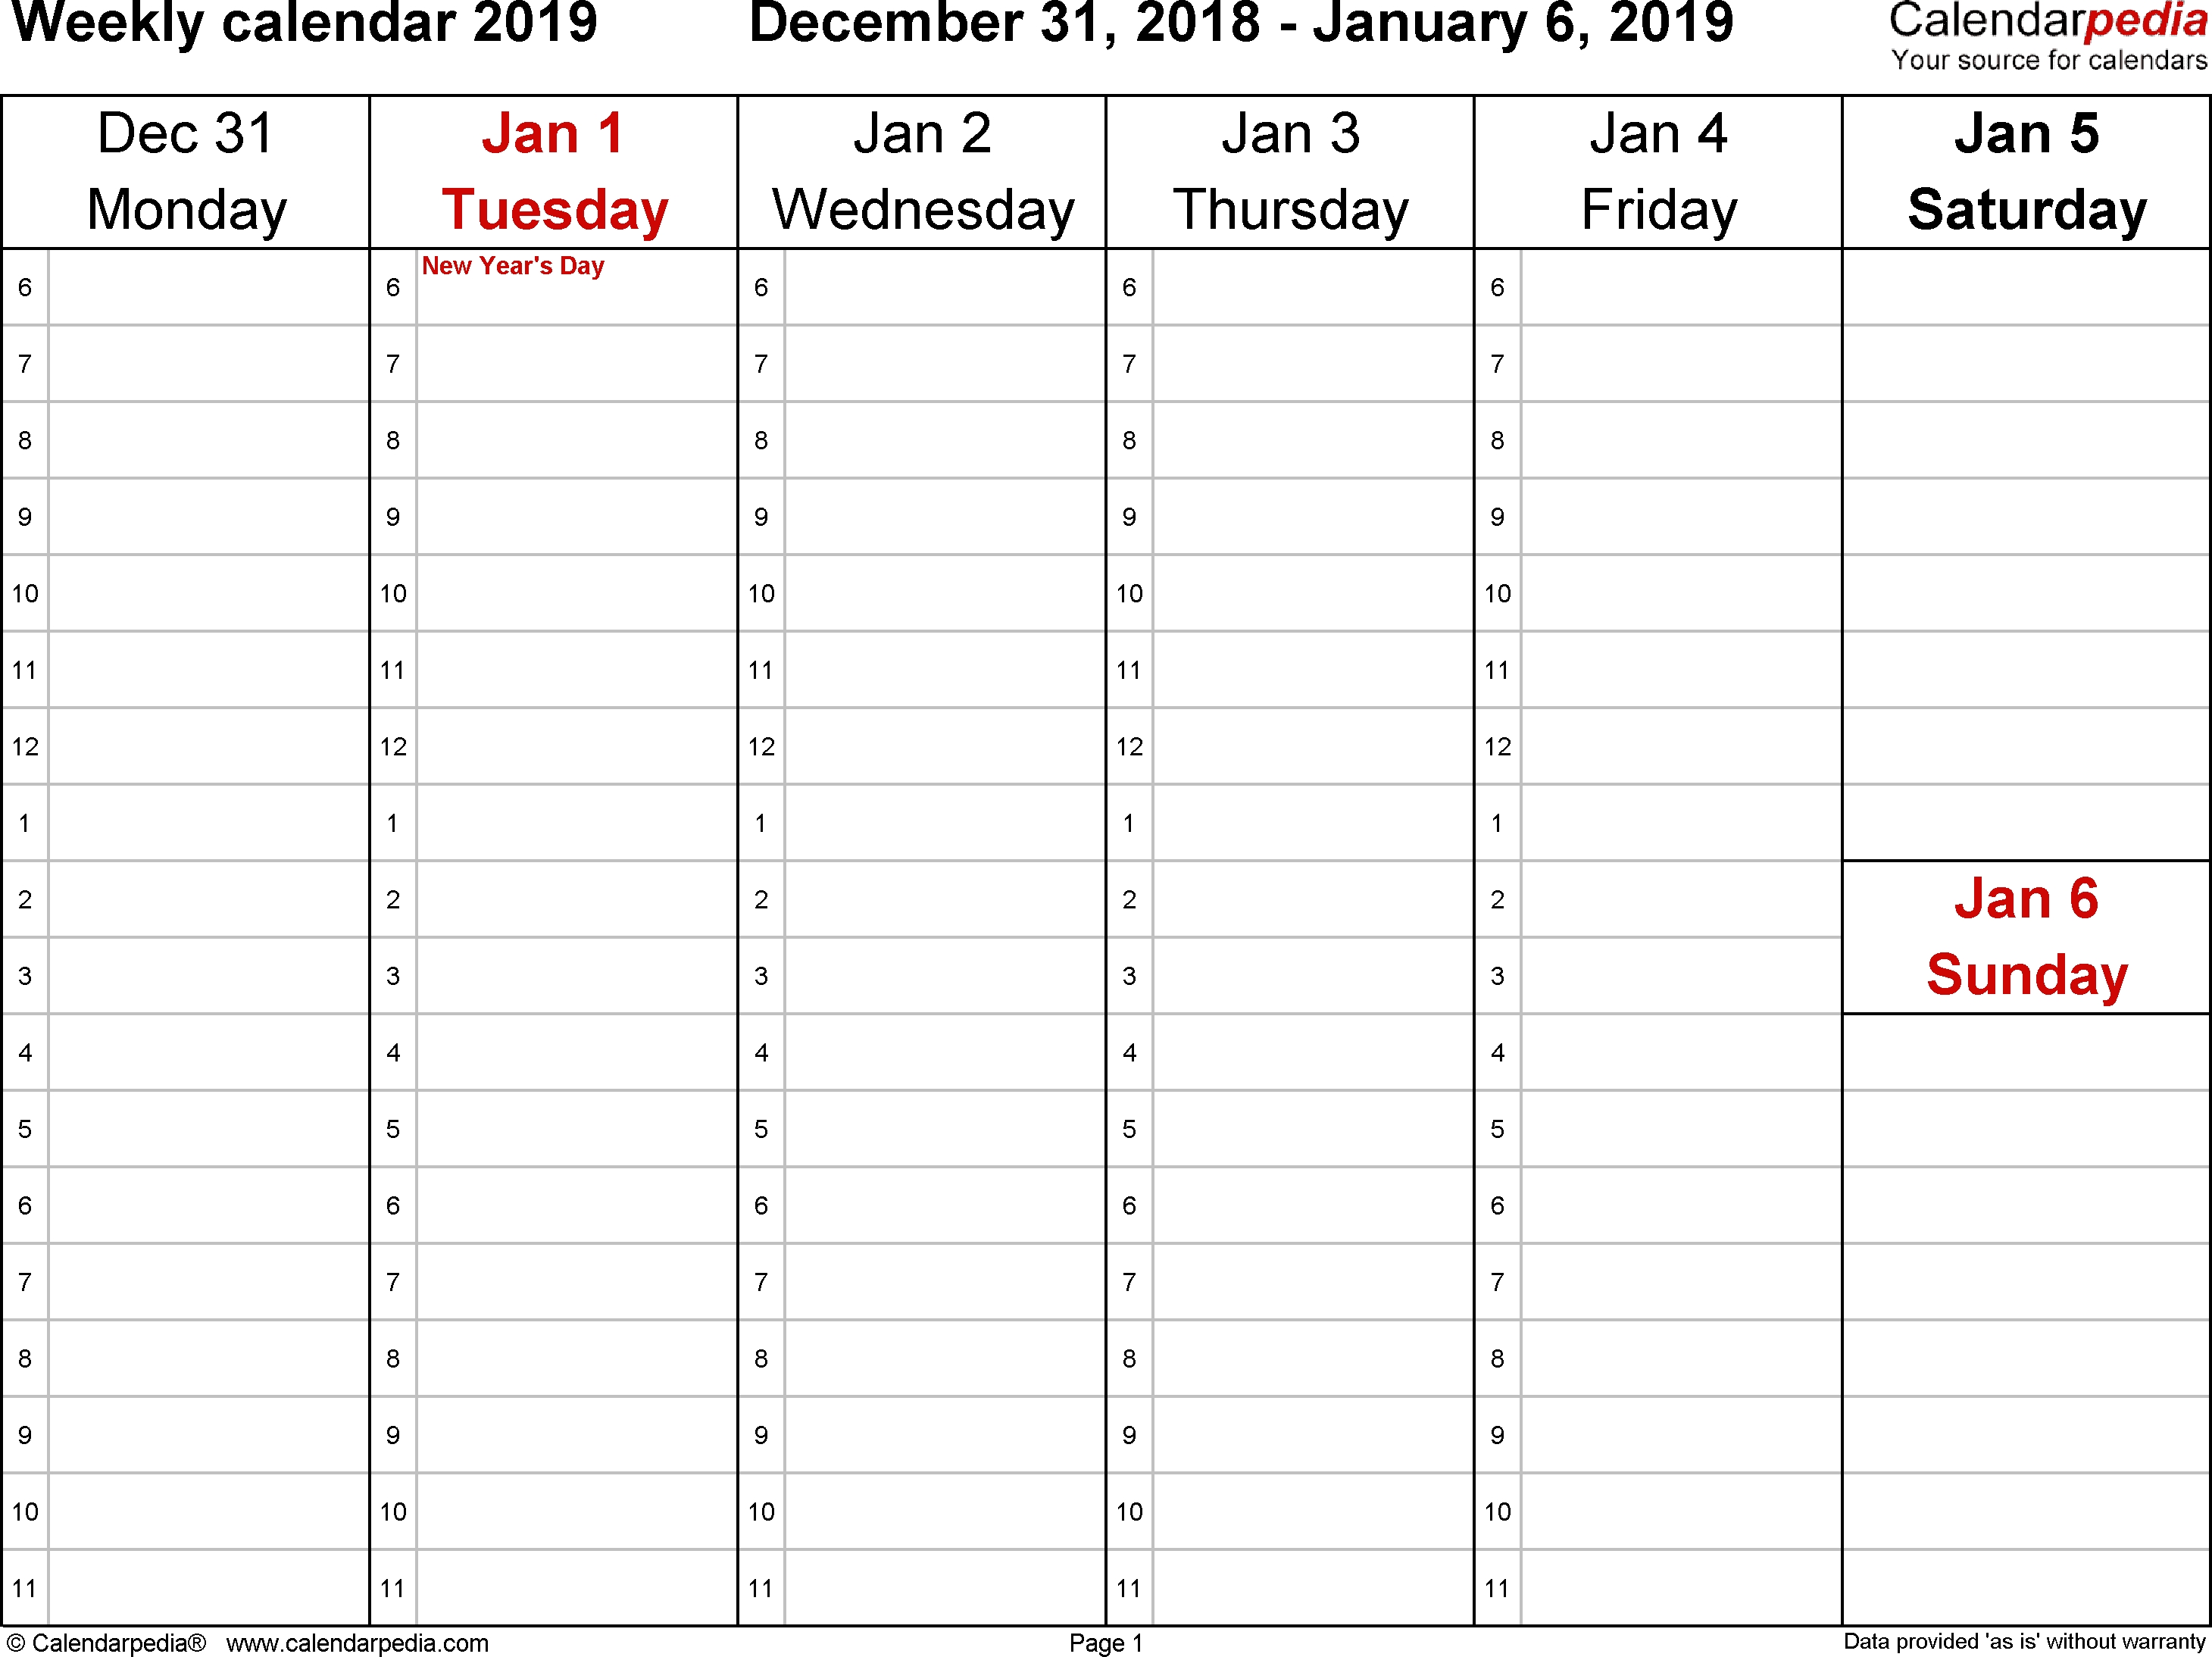 Weekly Calendar 2019 For Word - 12 Free Printable Templates Calendar Template Starting With Monday